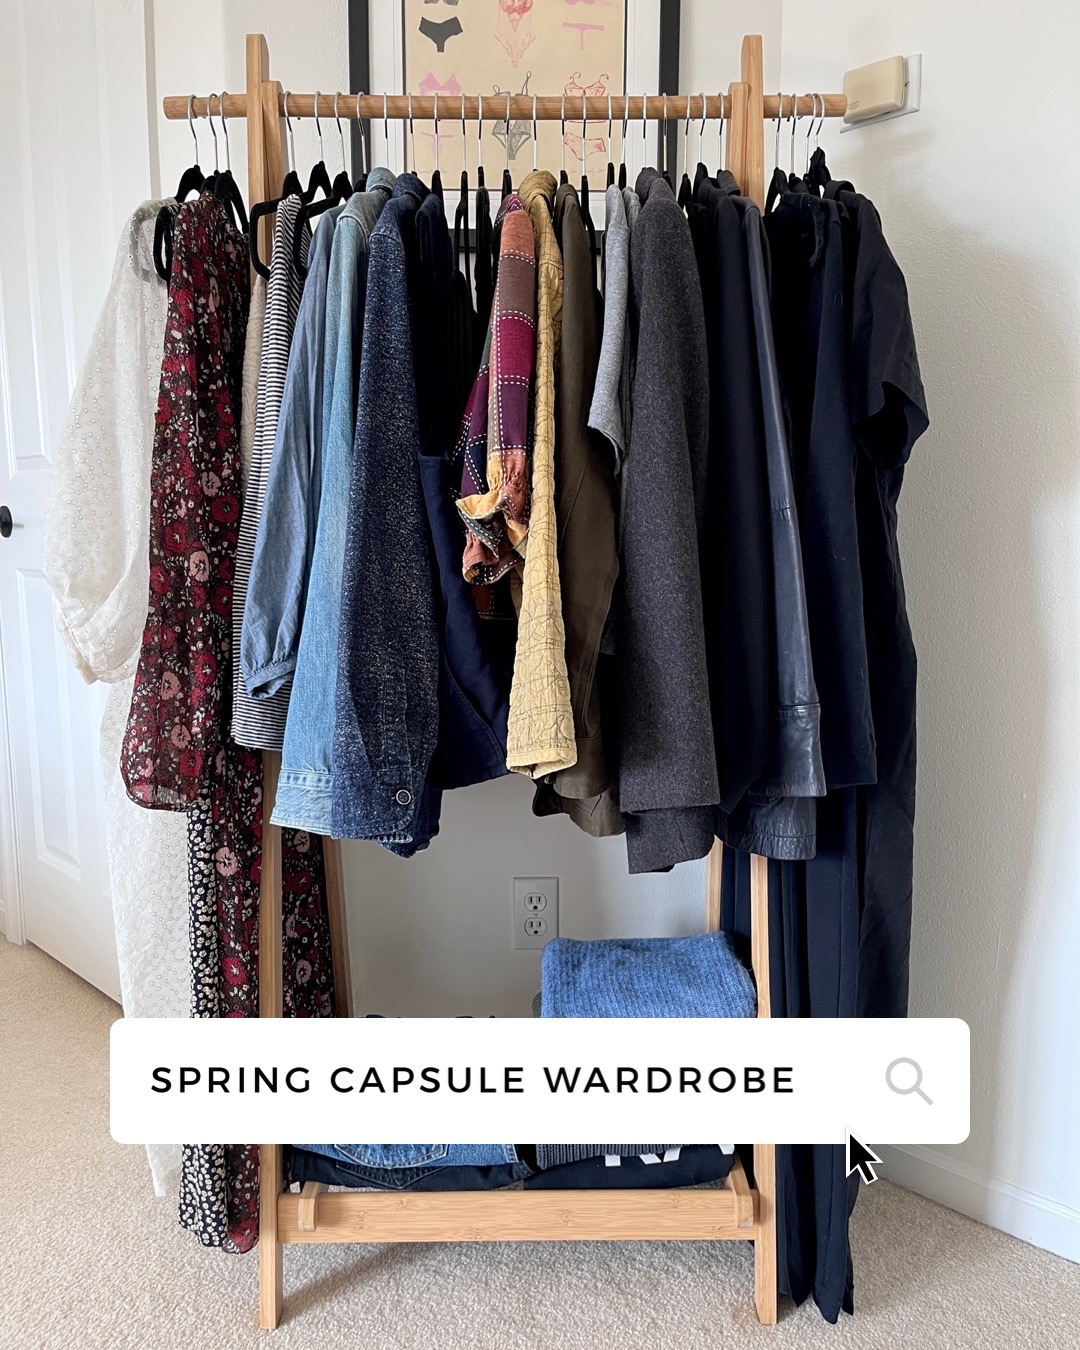 SPRING CAPSULE WARDROBE WITH COOL TONES + 15 OUTFIT IDEAS - LIFE